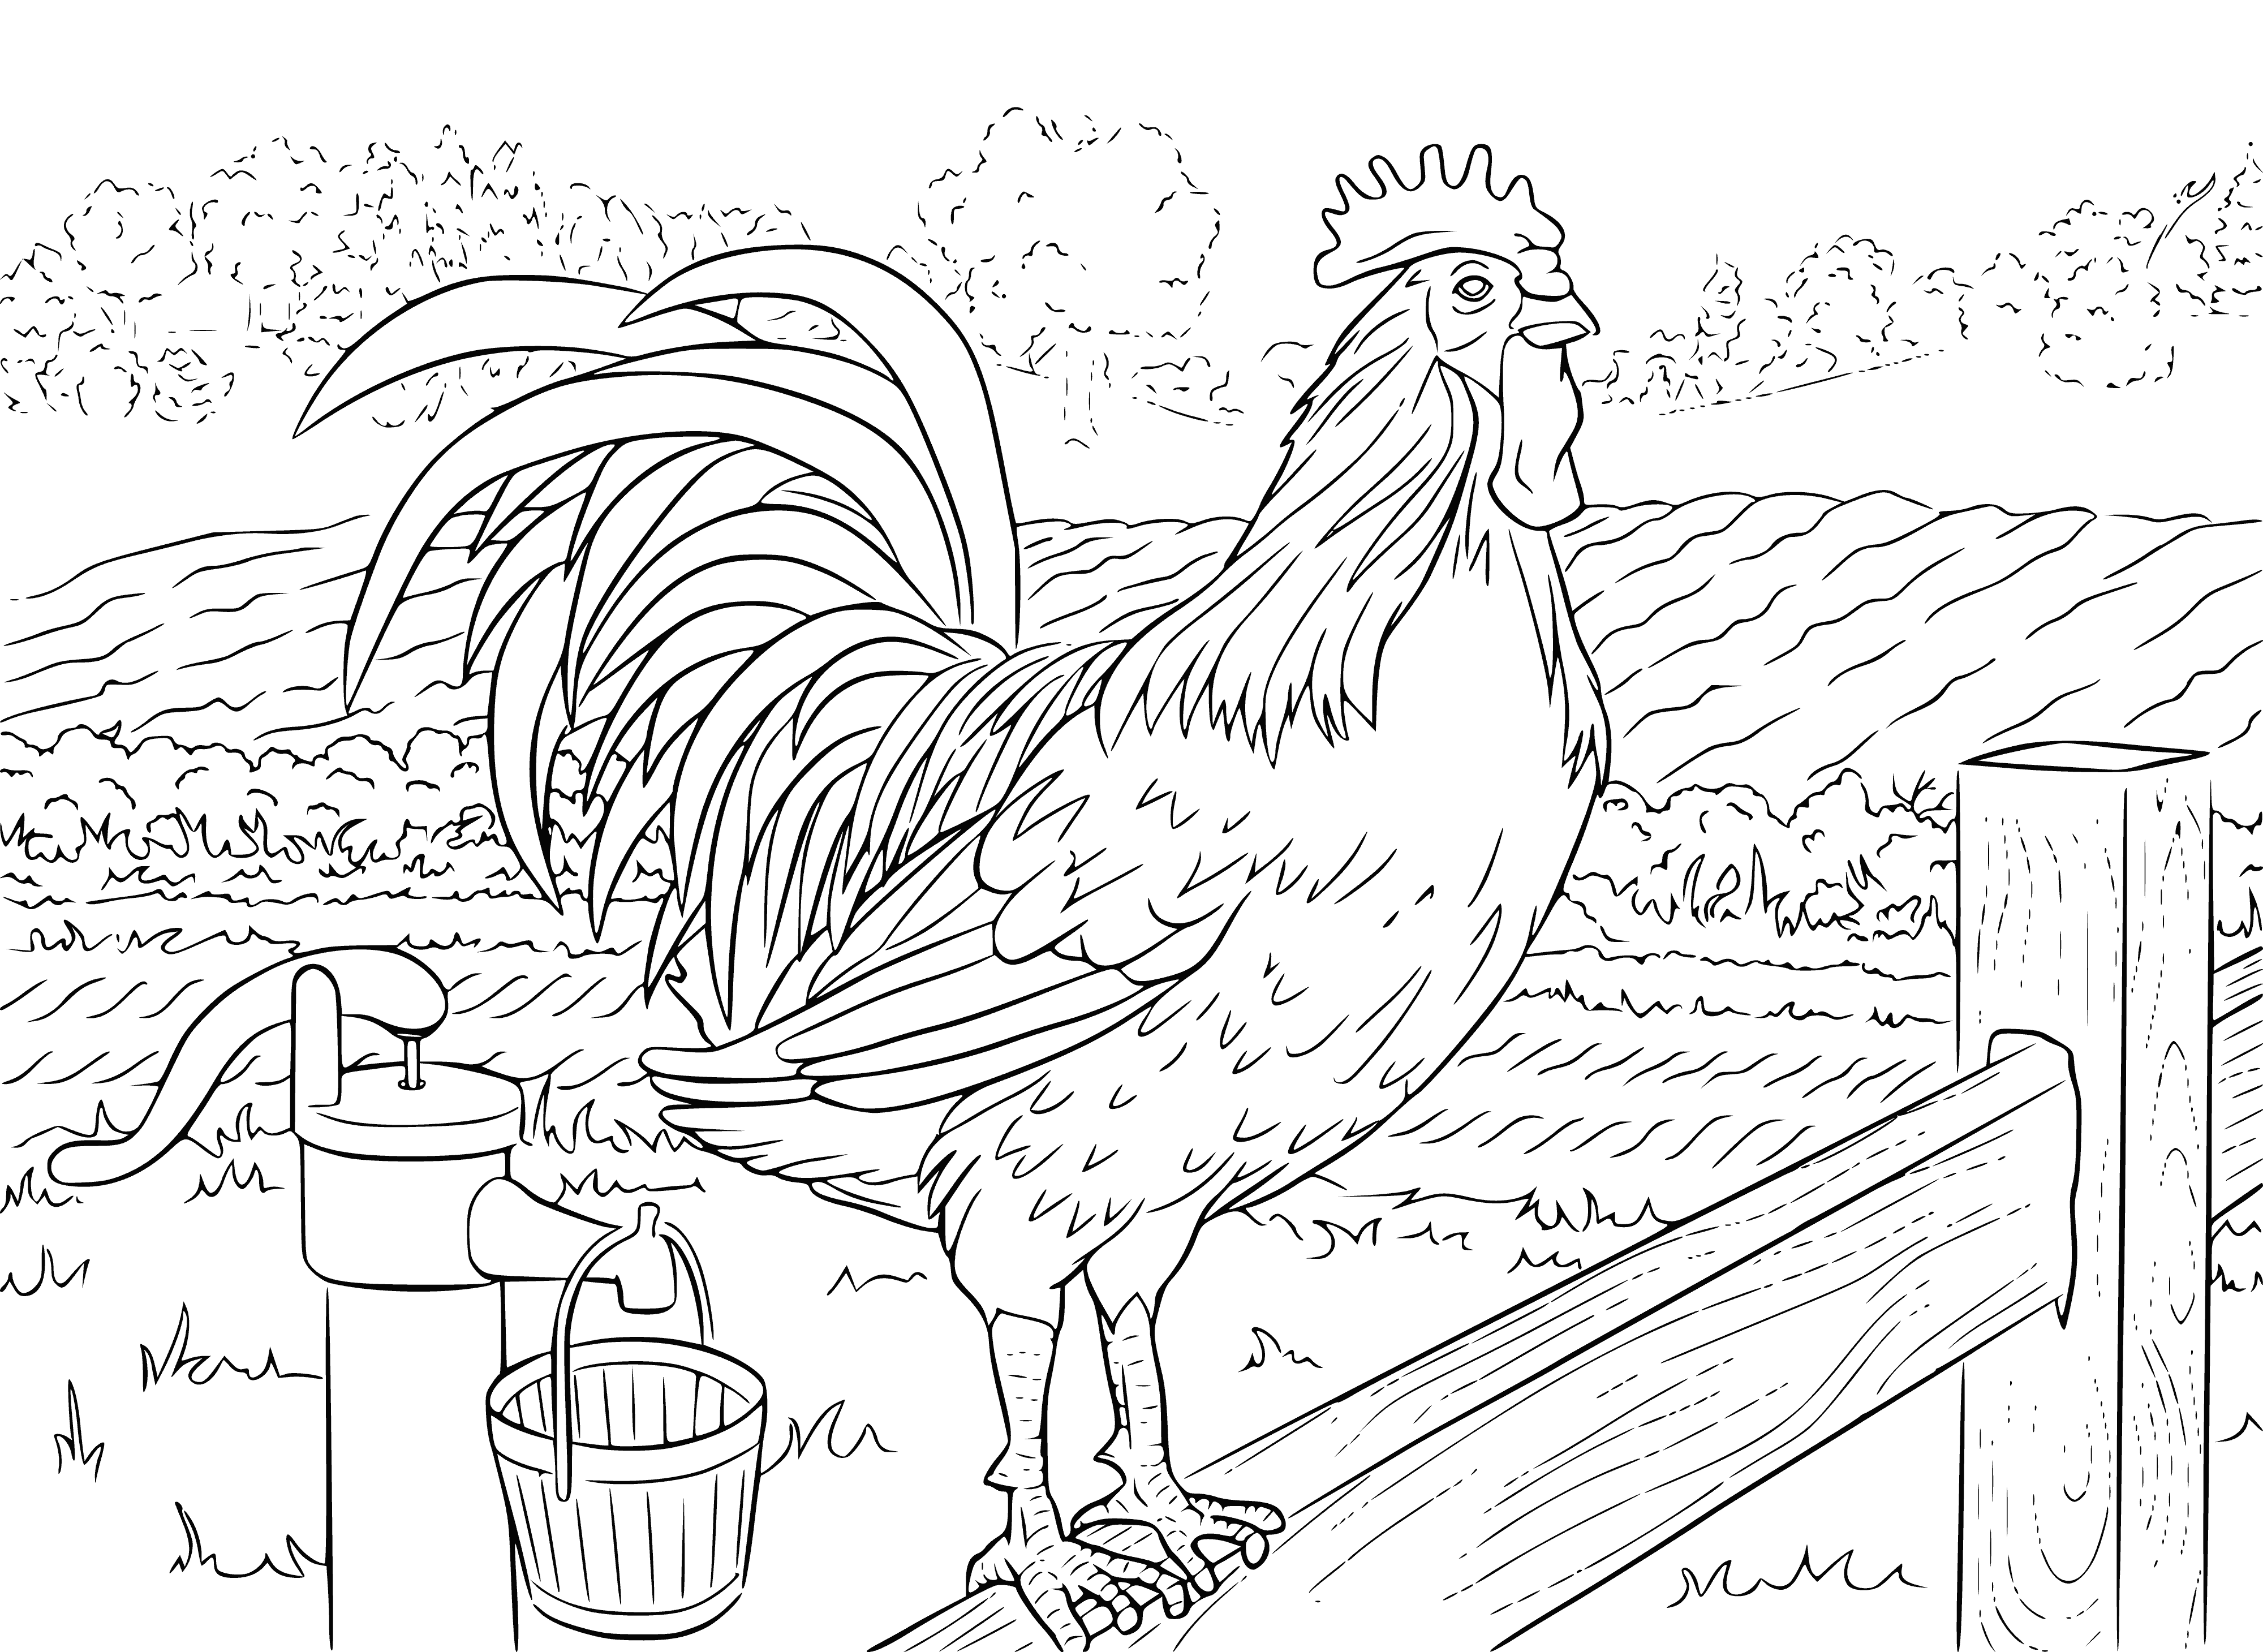 coloring page: Rooster perched atop fence, red crest/wattles, black feathers, long curved beak, yellow eyes. Sun shining, sky blue, green field, trees in distance.